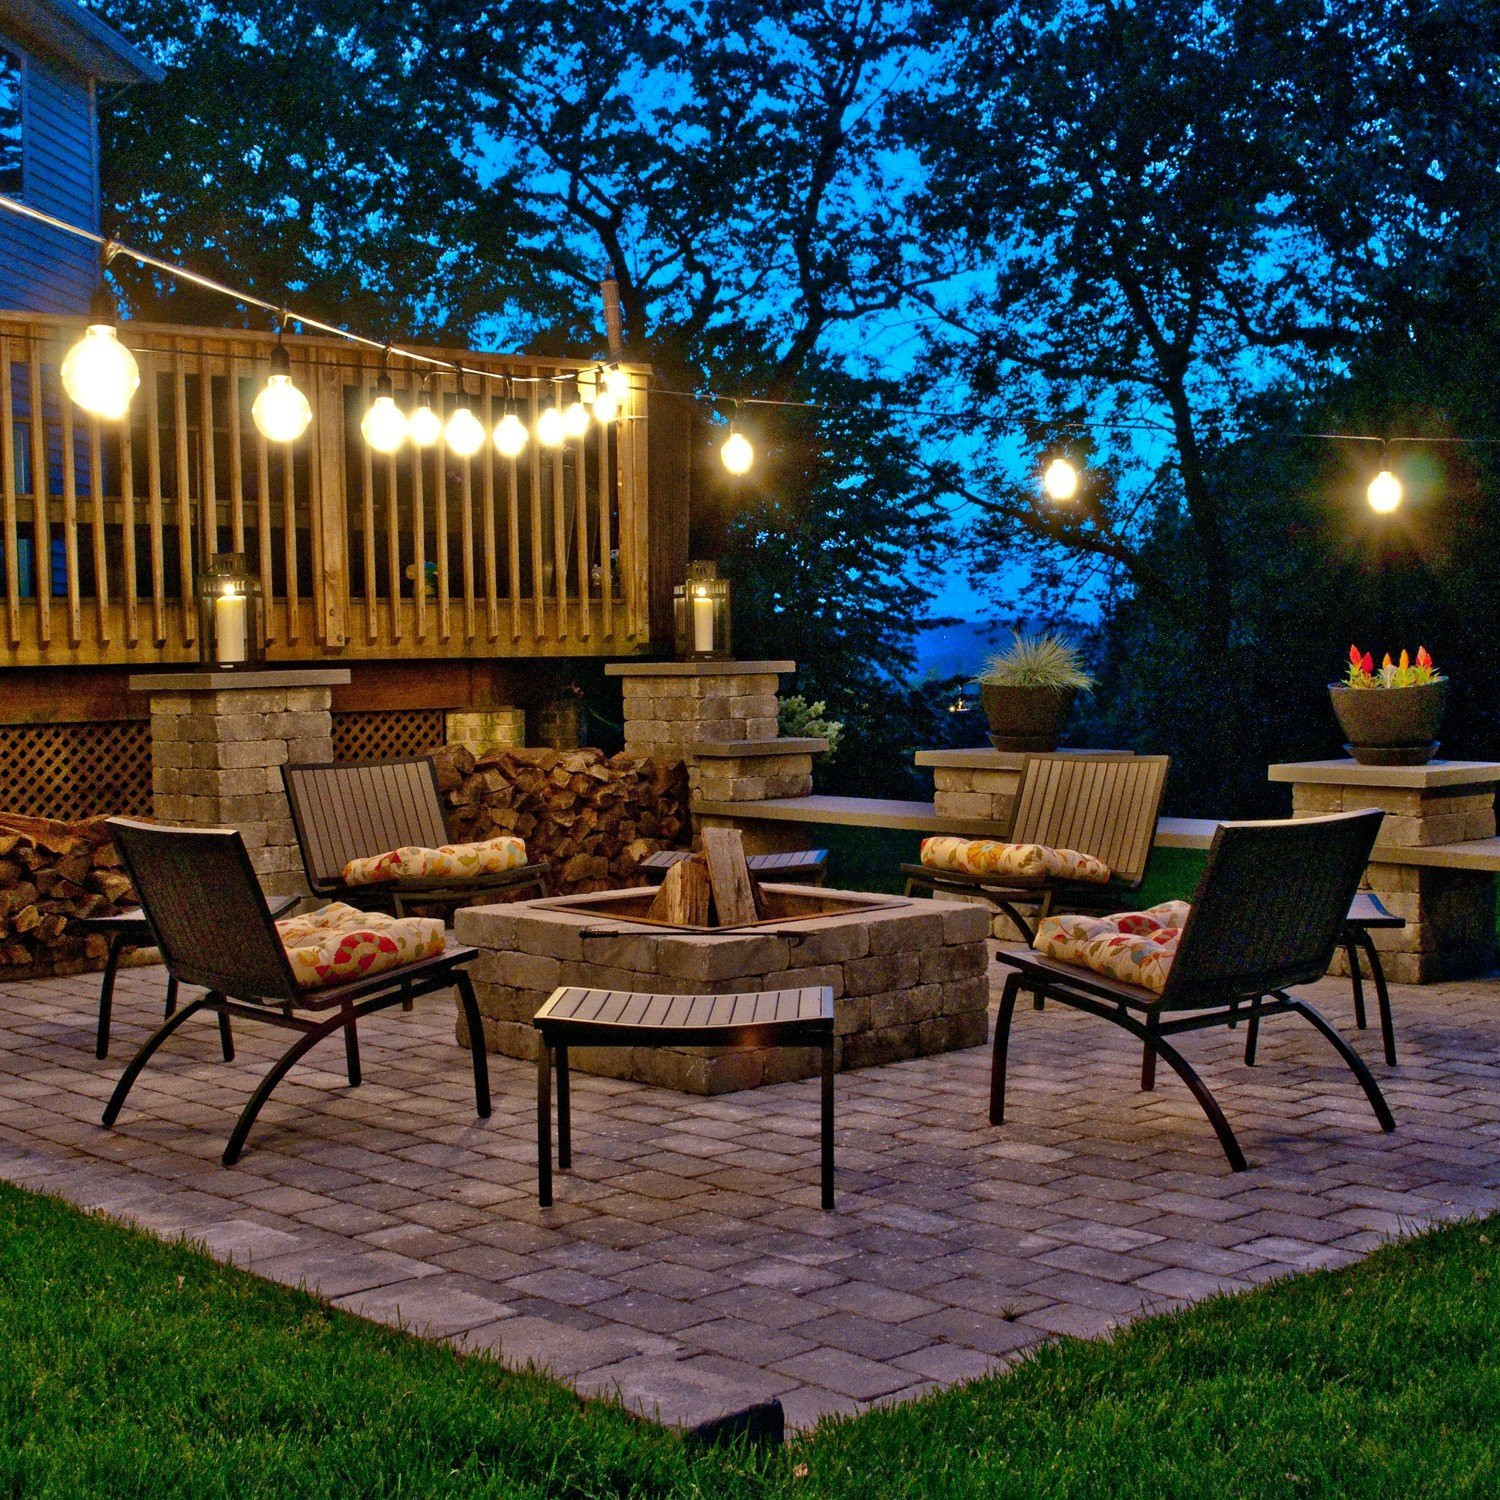 Outdoor Landscape Lighting Ideas
 Top Outdoor String Lights for the Holidays Teak Patio